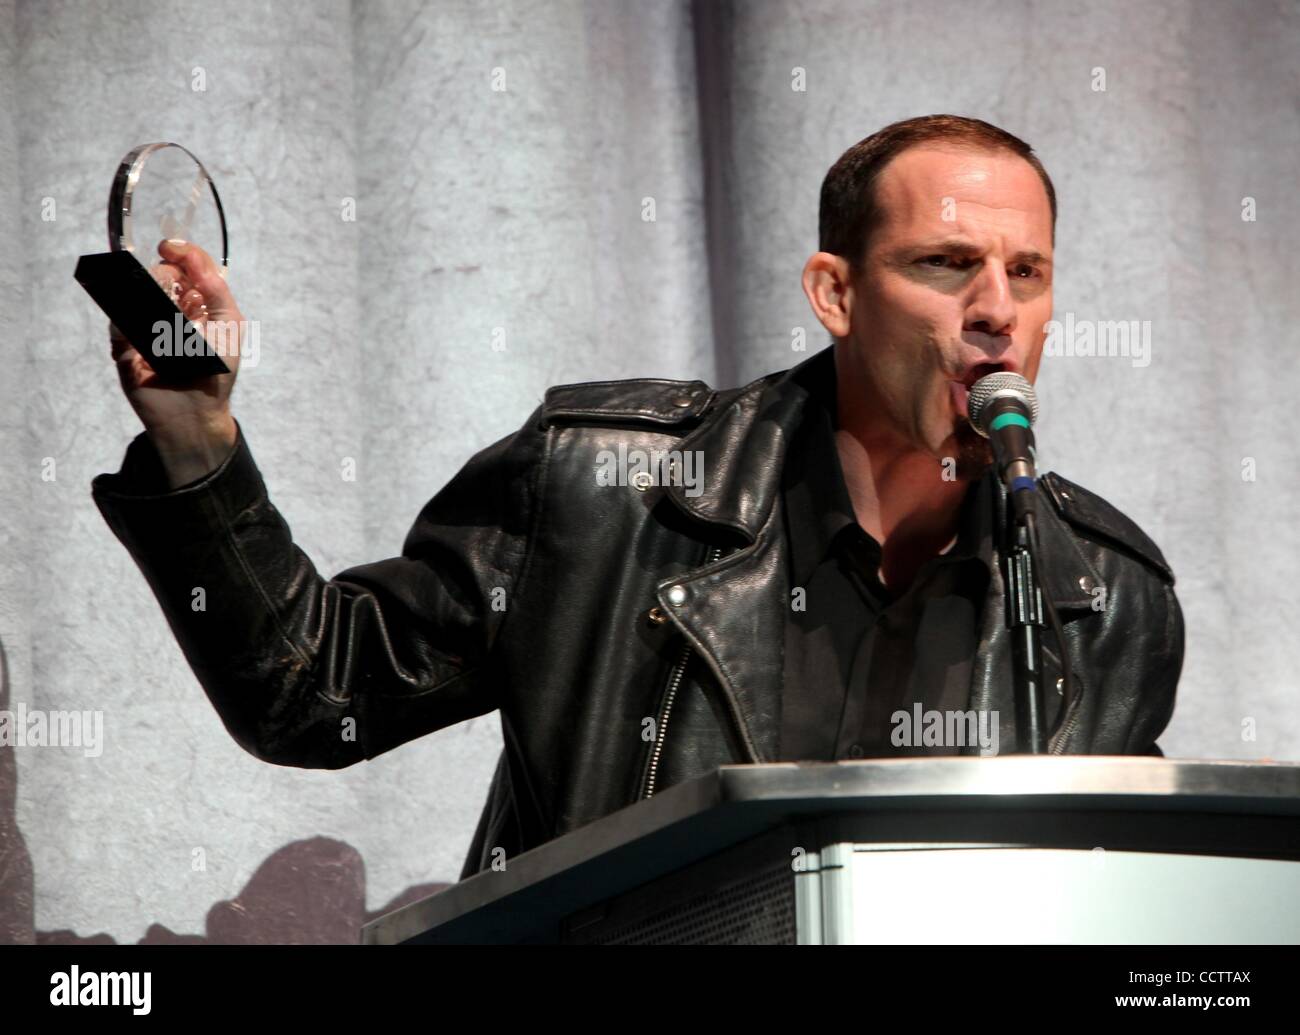 Mar 06, 2010 - Anaheim, California, USA - ERIC BLAIR of The Blairing Out Show accepts the Best Punk award for the band 'The Adolescents' during the 2010 Orange County Music Awards at The Grove of Anaheim. (Credit Image: Â© Mark Samala/ZUMA Press) Stock Photo